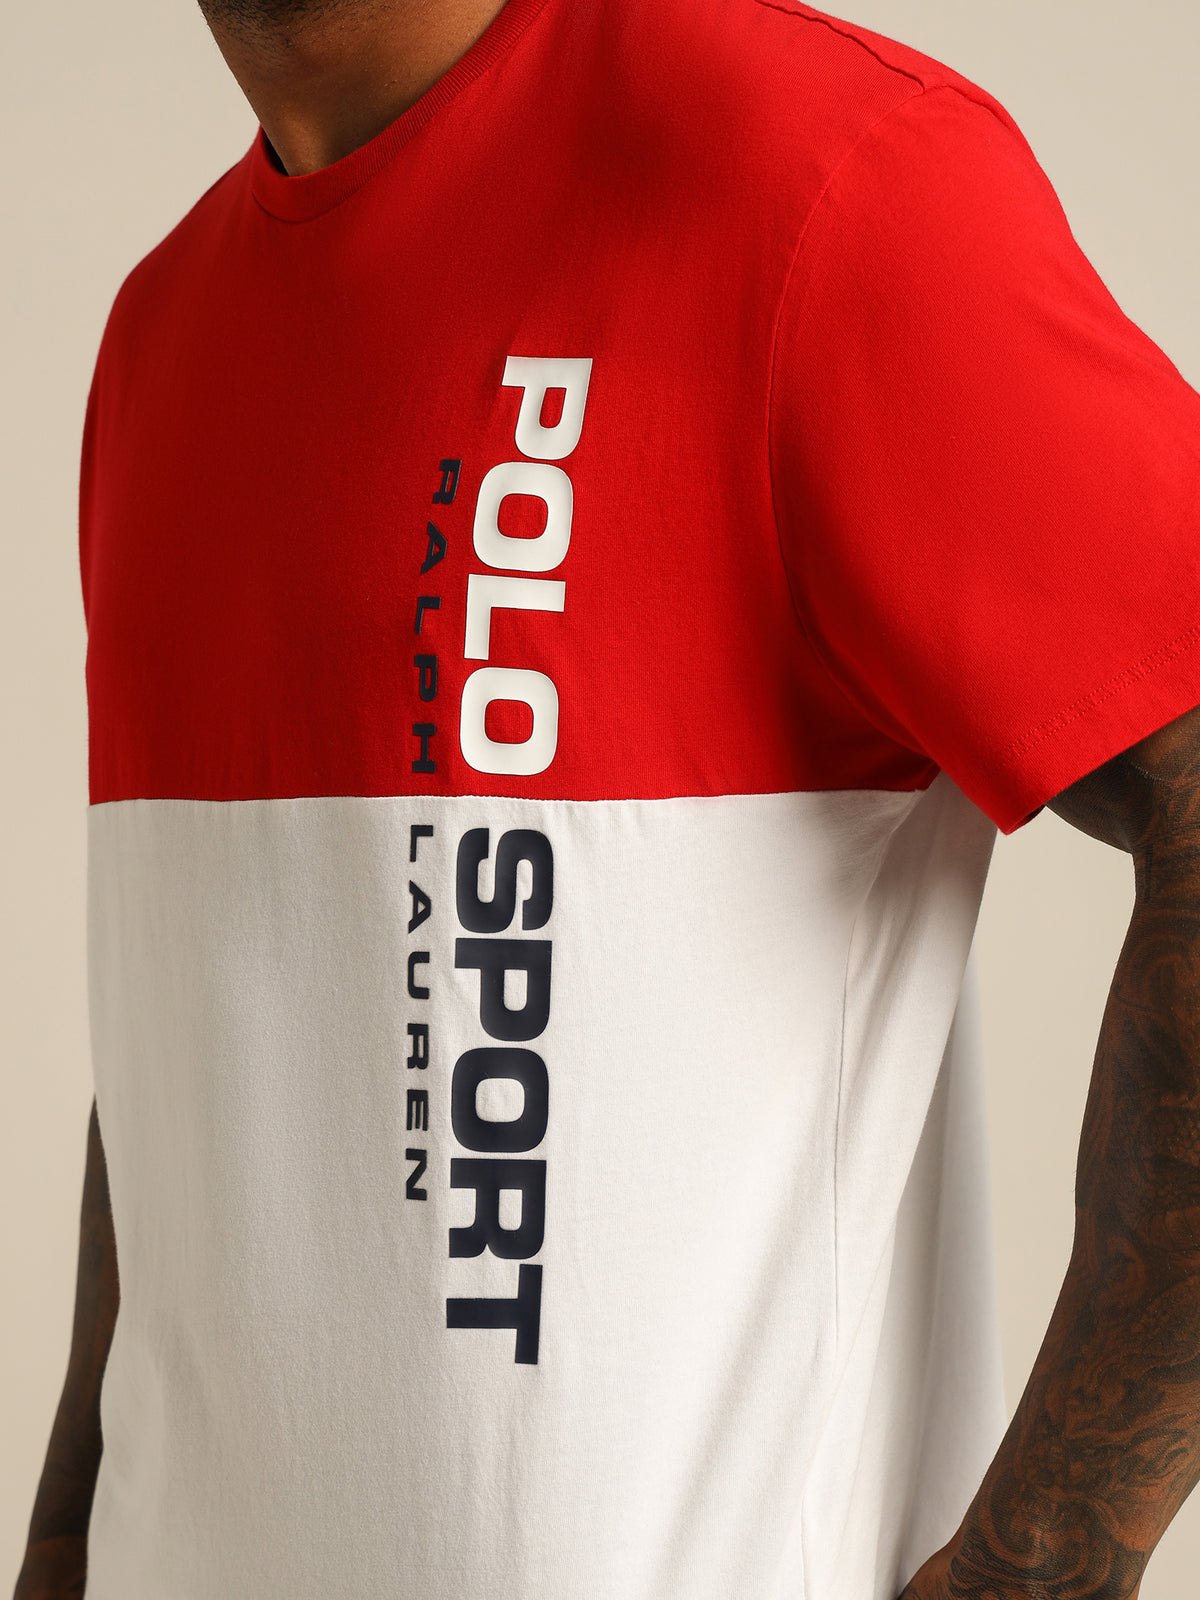 Polo Sport T-Shirt in Red